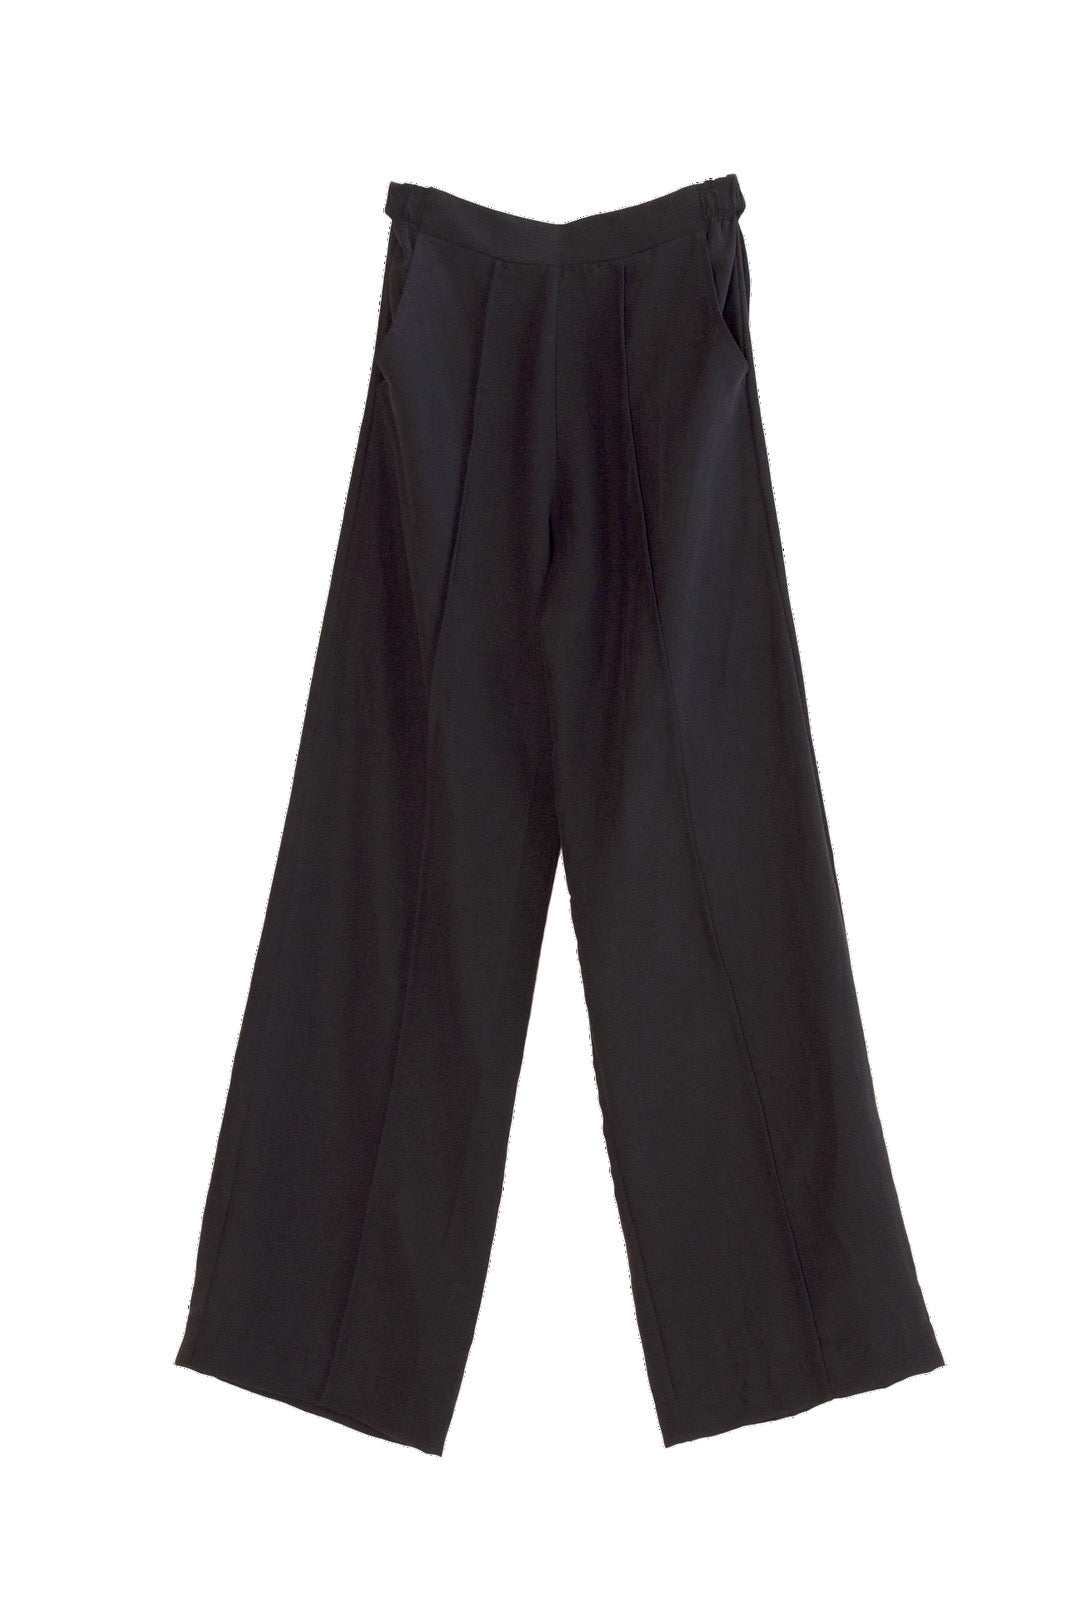 A pair of OVNA OVICH Eleanor Pant – Onyx on a white background.